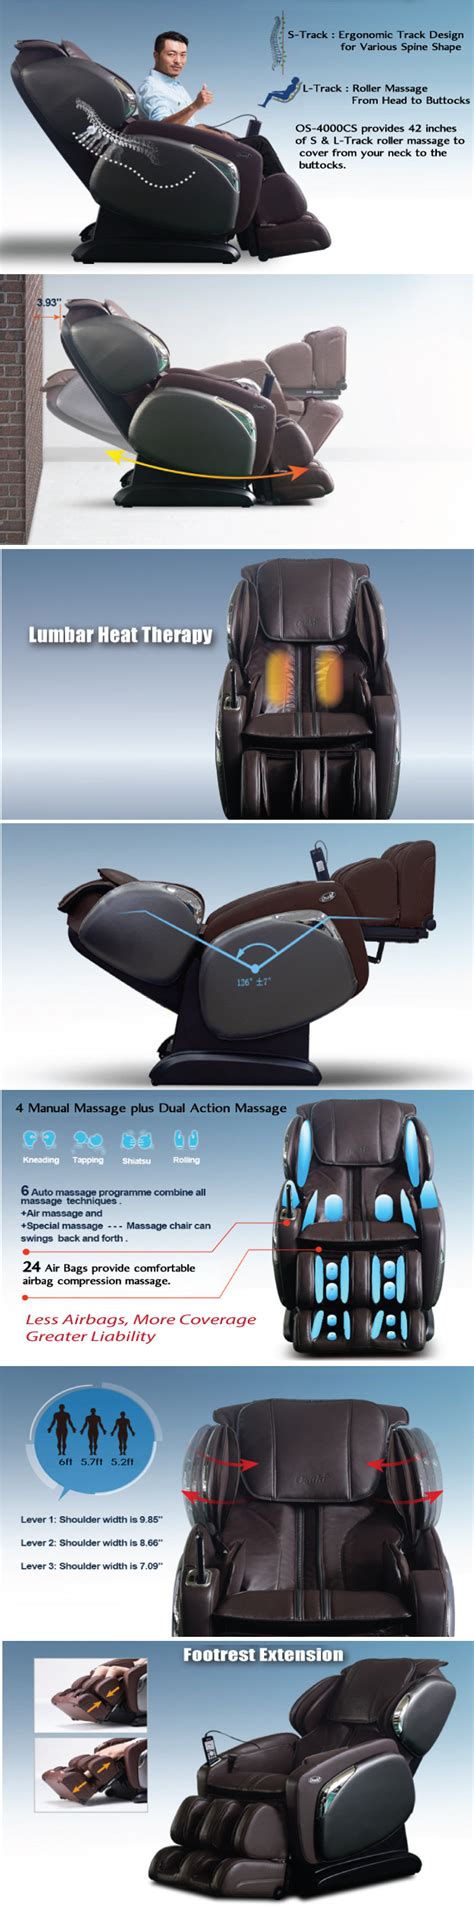 titan osaki brown faux leather reclining massage chair os 4000ls brown